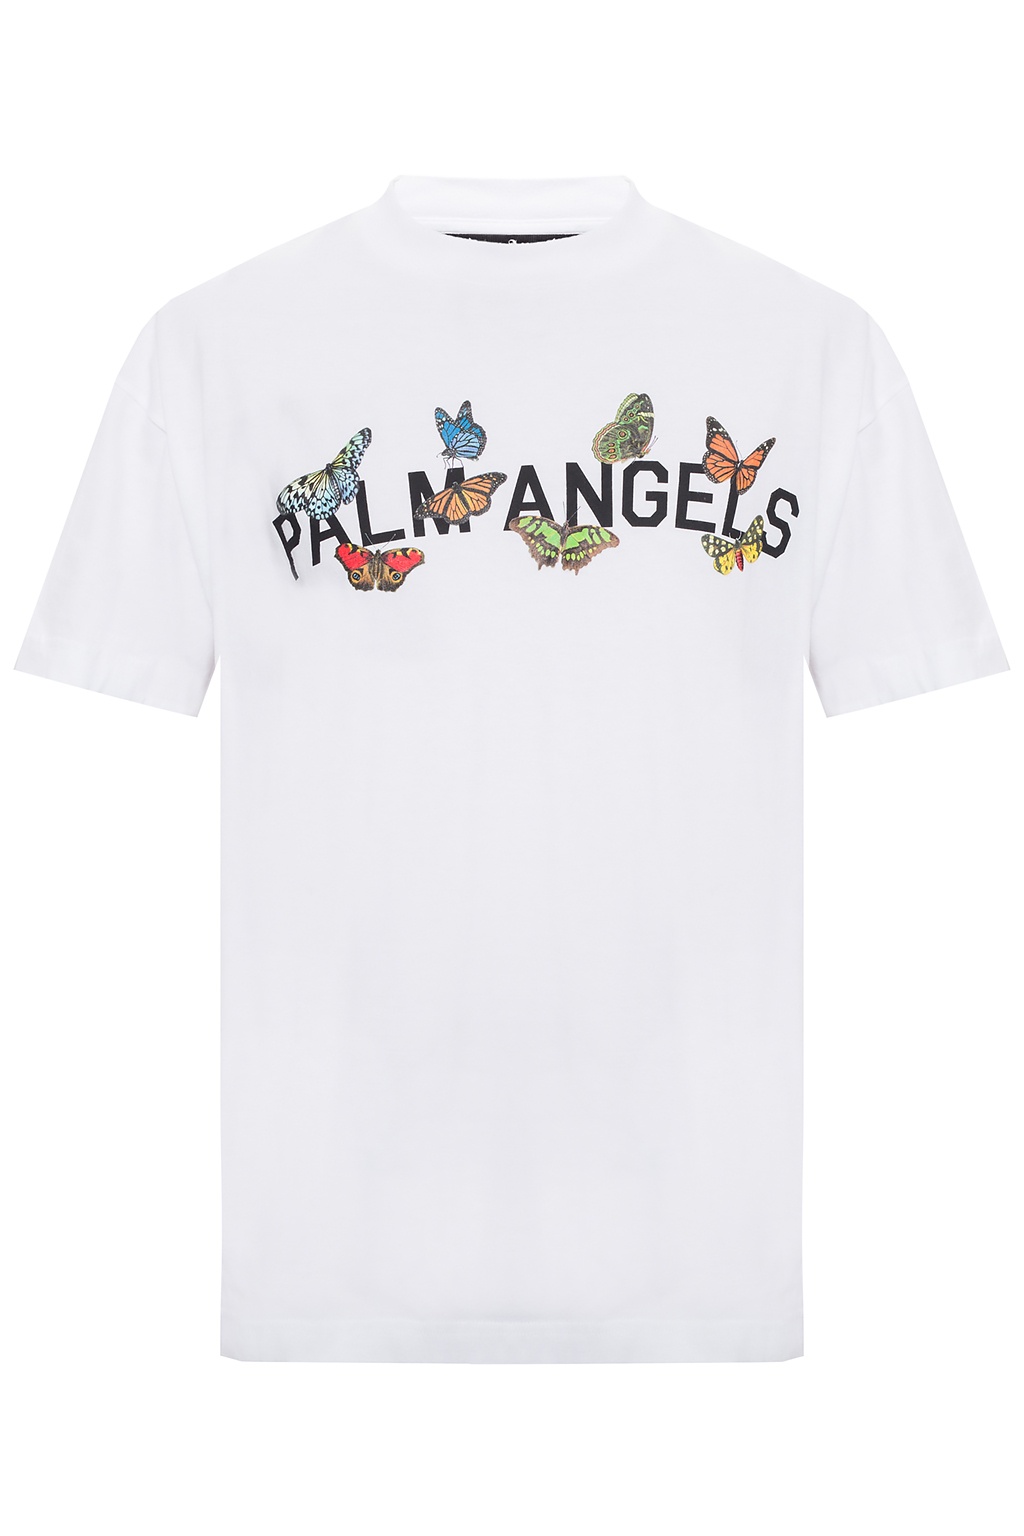 palm angels white butterfly t shirt